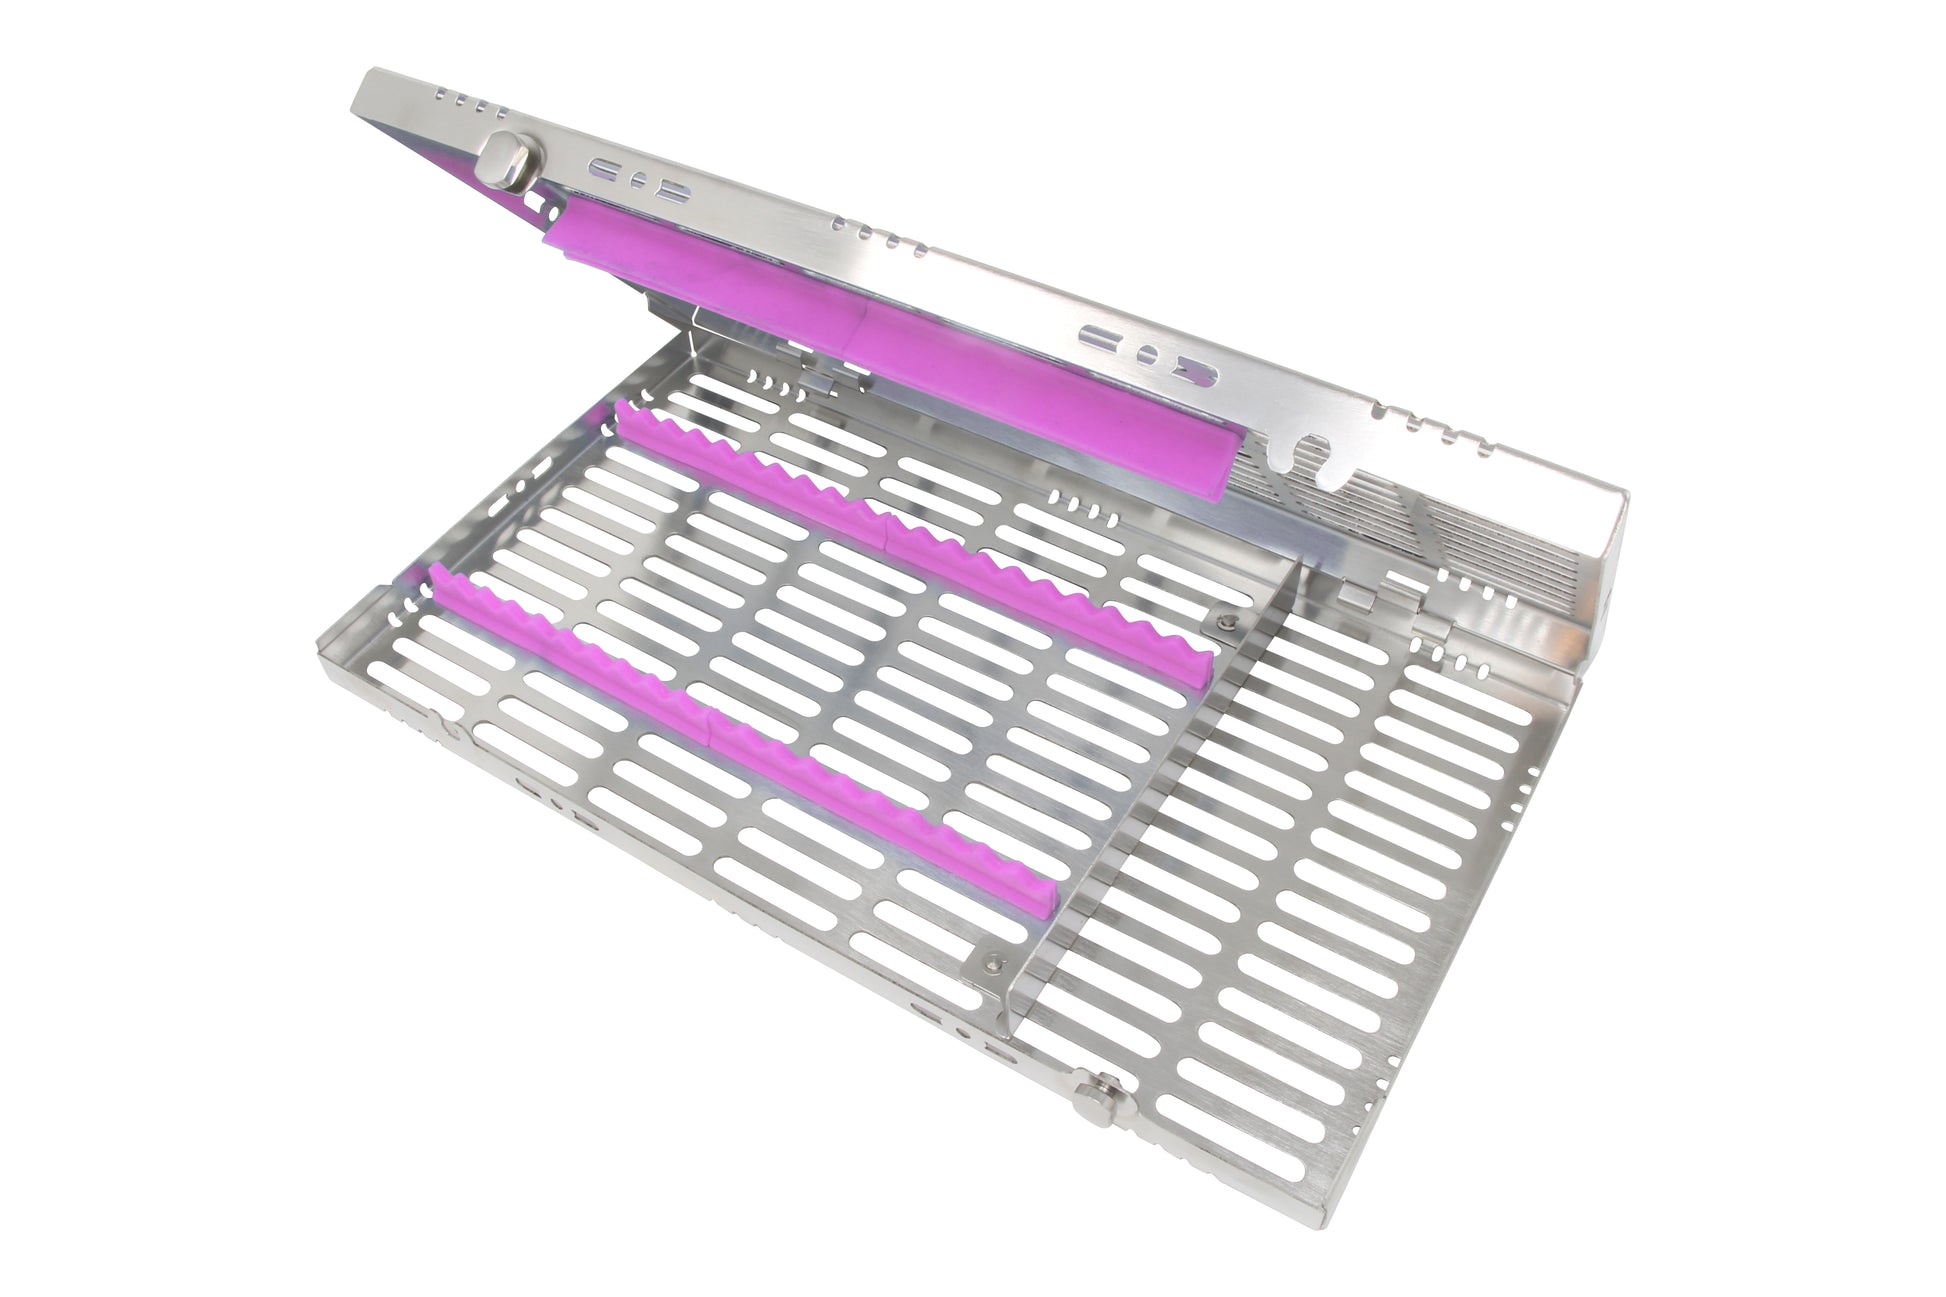 Sterilization Cassette for 20 Instruments, With Adjustable Accessory Area - 370x202x30, Detachable - HiTeck Medical Instruments